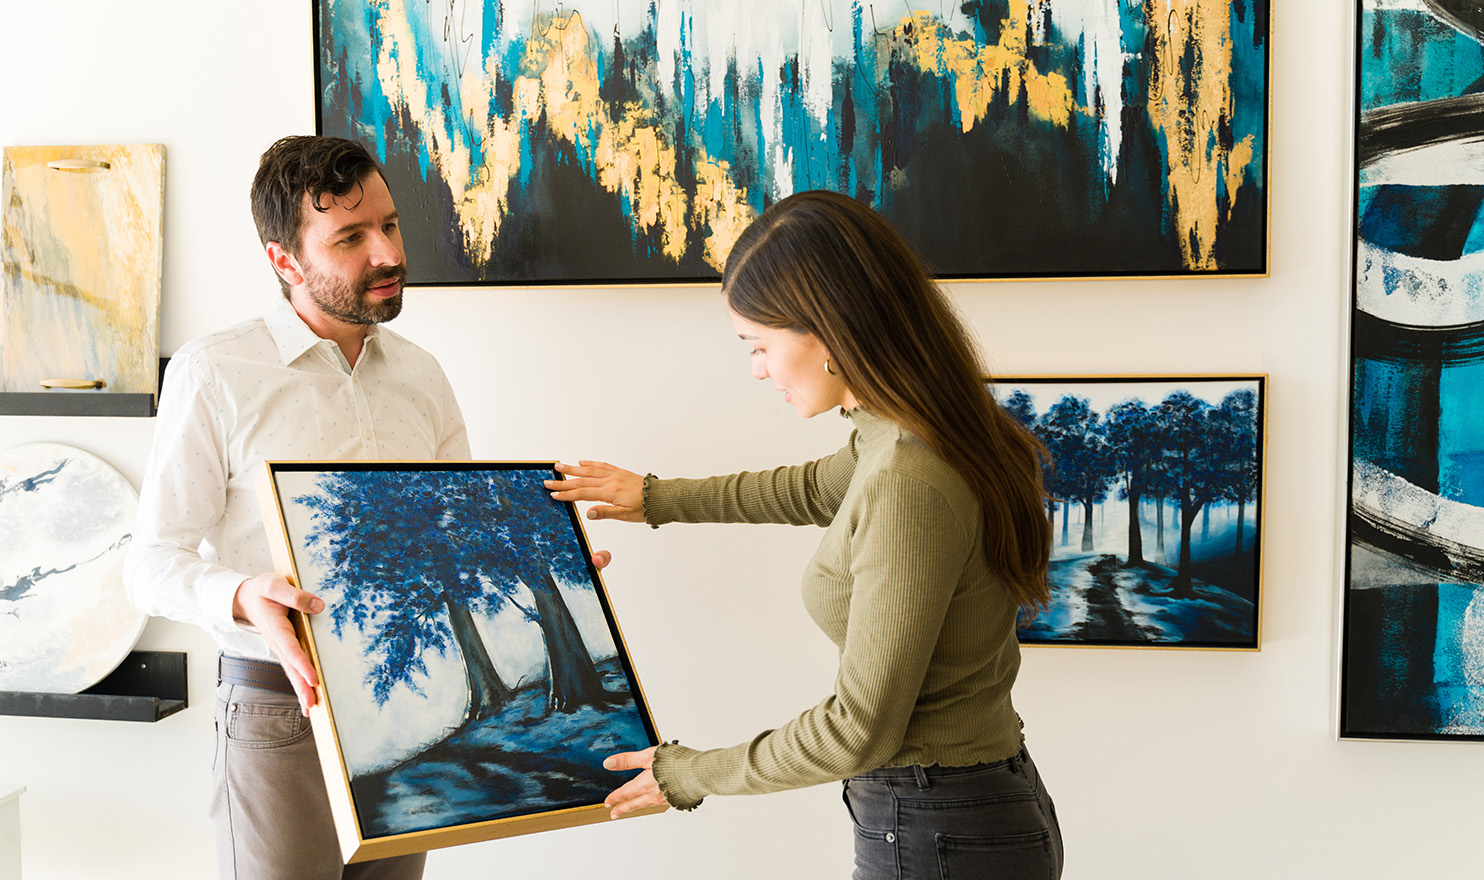 An artist is holding his painting that is part of a collection he is showcasing in a gallery. A potential buyer is examining his painting as she admires the detail in his work.